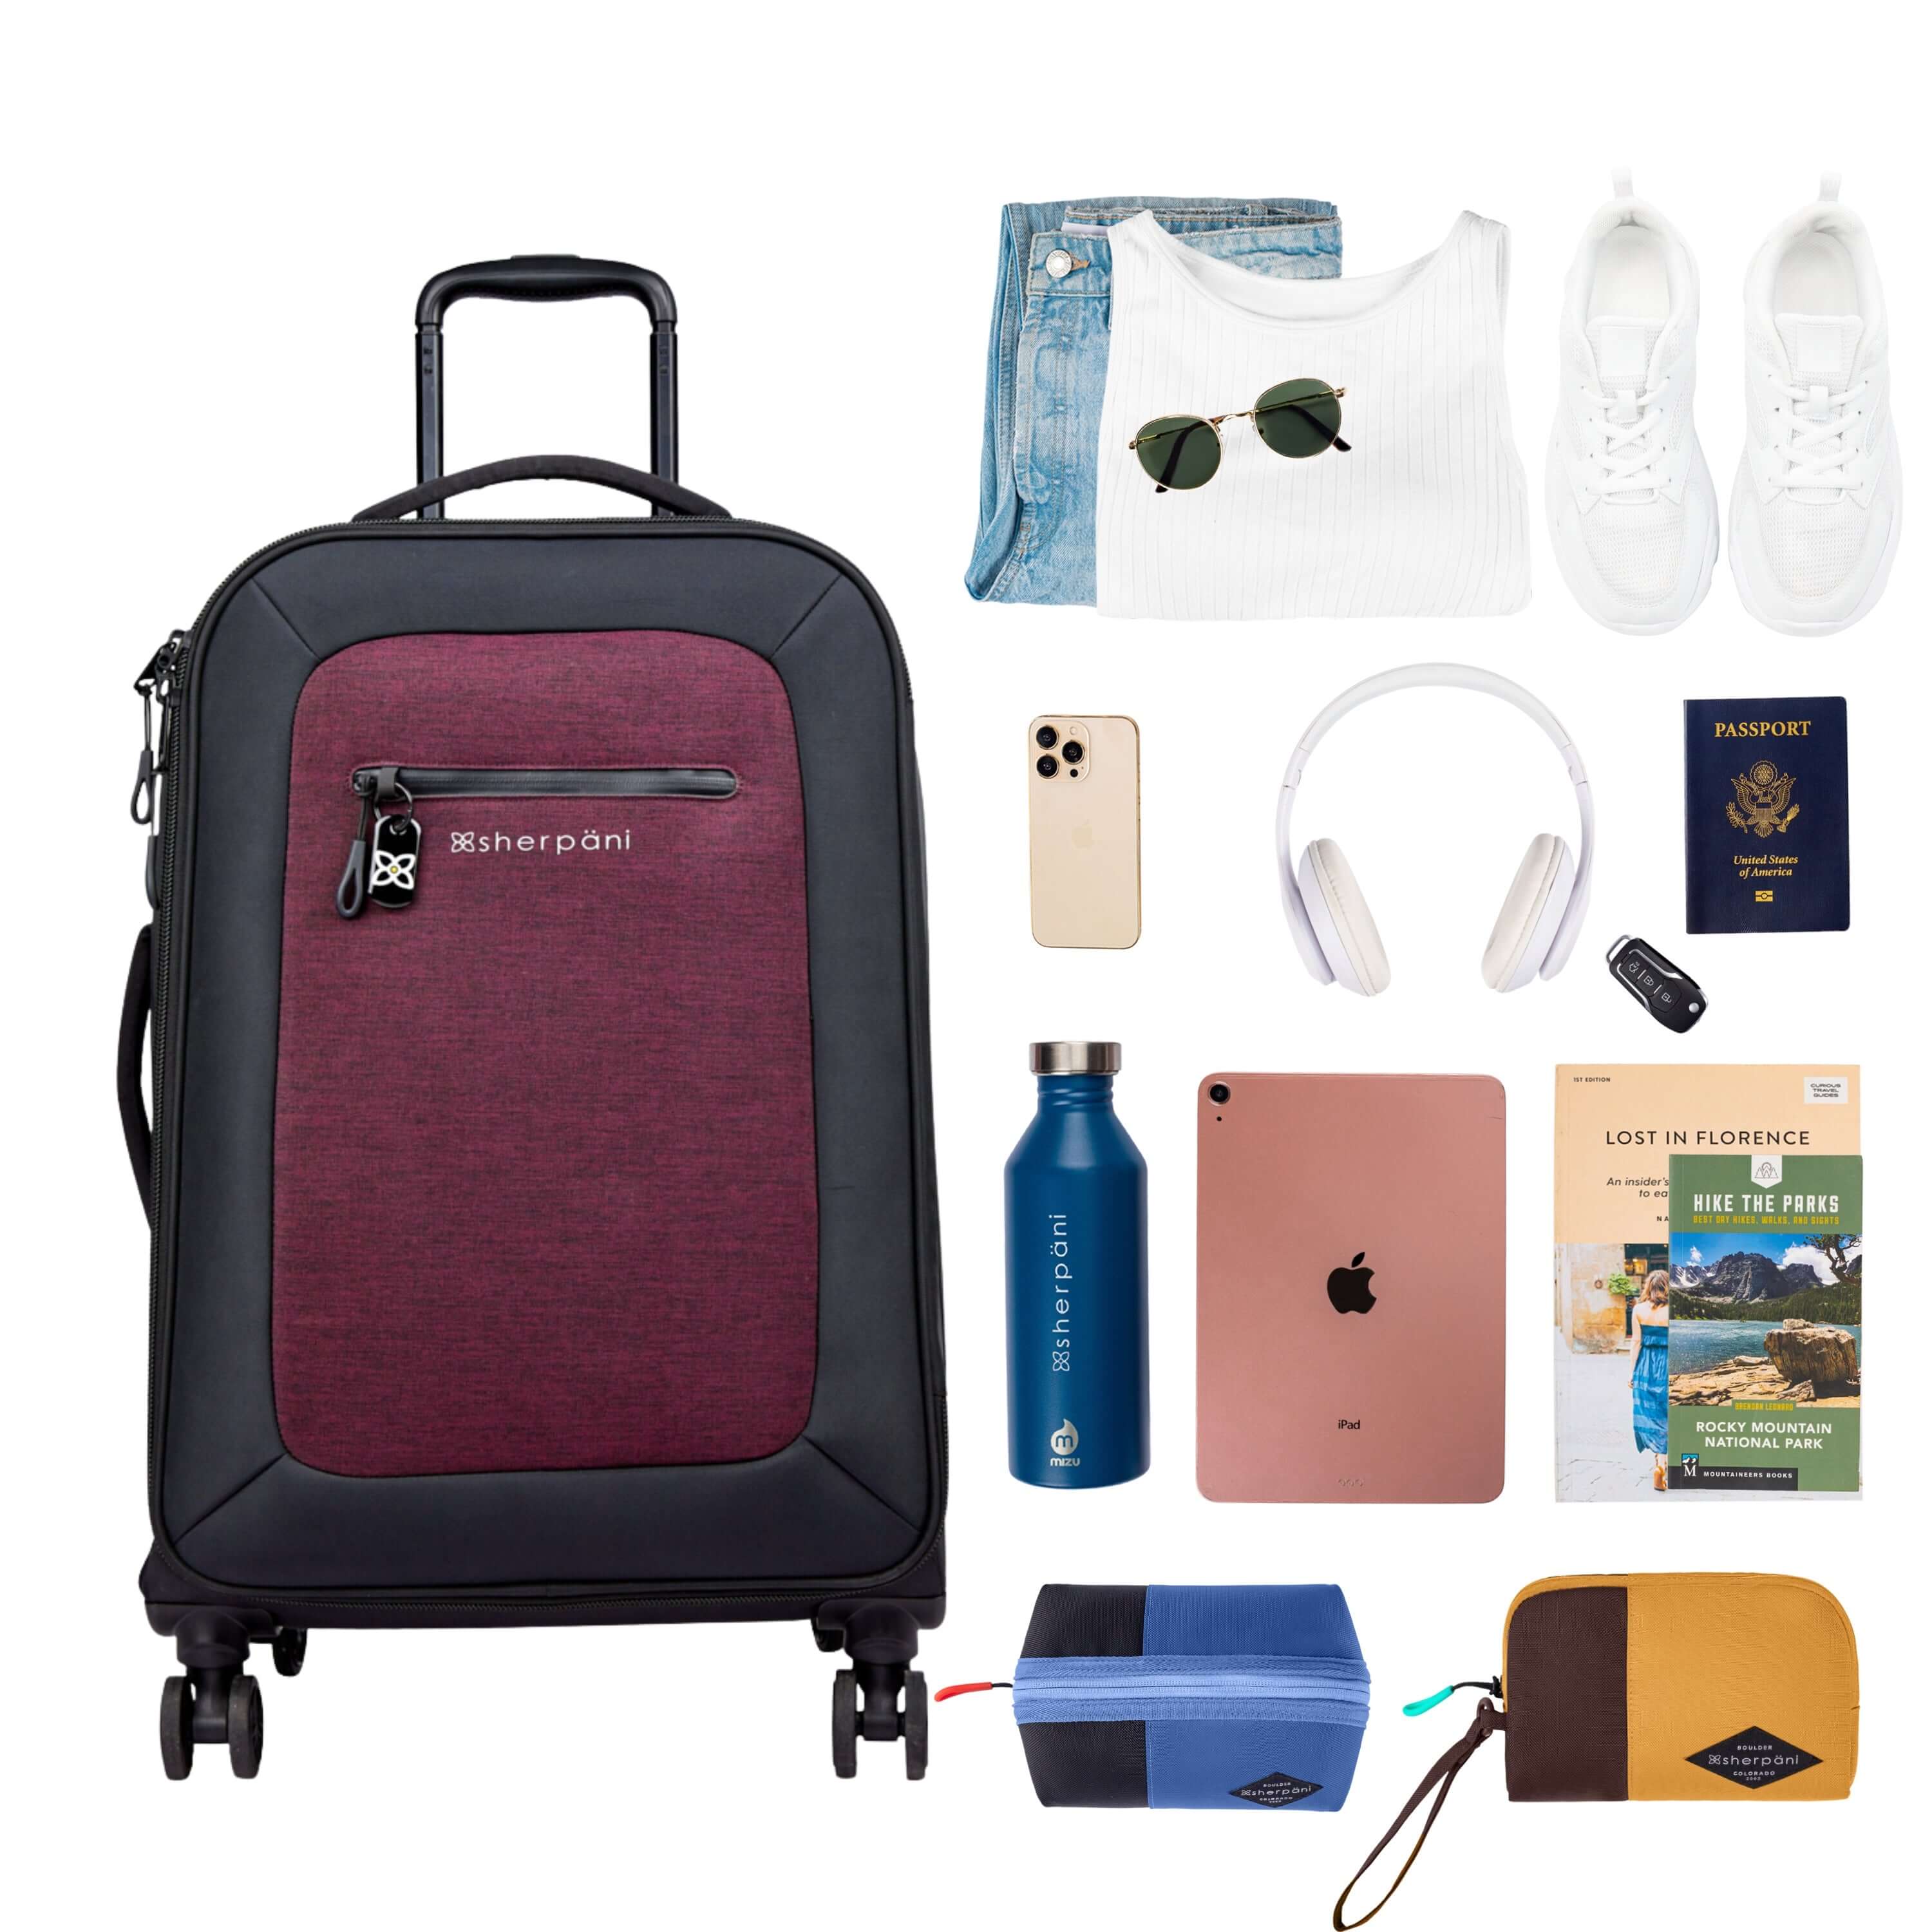 Top view of example items to fill the suitcase. On the left lies Sherpani’s Anti-Theft luggage, the Hemisphere in Merlot. On the right lies an assortment of items: change of clothes, sunglasses, sneakers, phone, headphones, car key, passport, water bottle, tablet, travel books, Sherpani travel accessories, the Harmony in Pacific Blue and the Jolie in Sundial. 